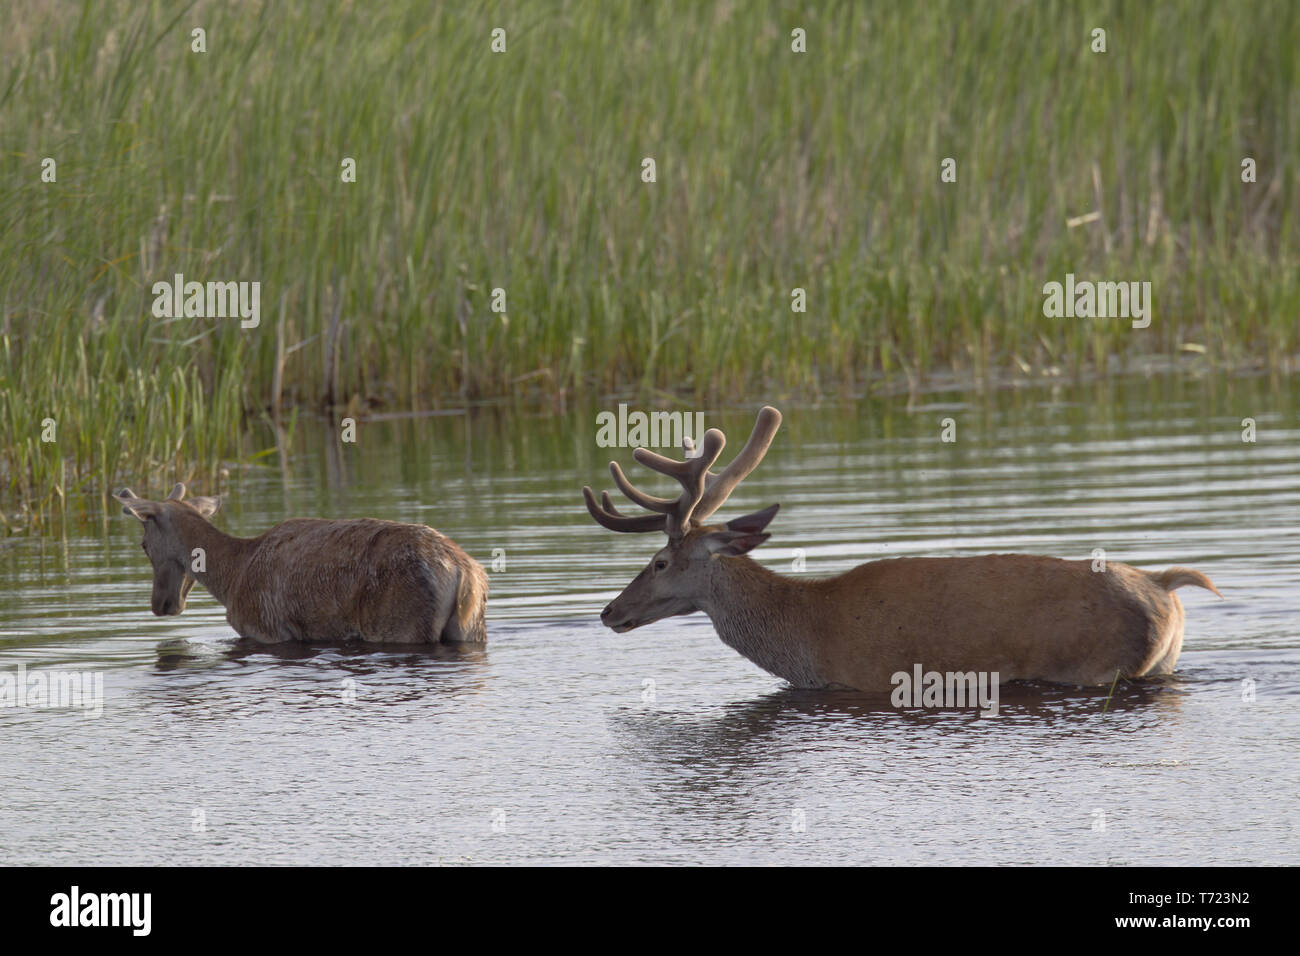 Red stags with velvet-covered antlers in a pond Stock Photo